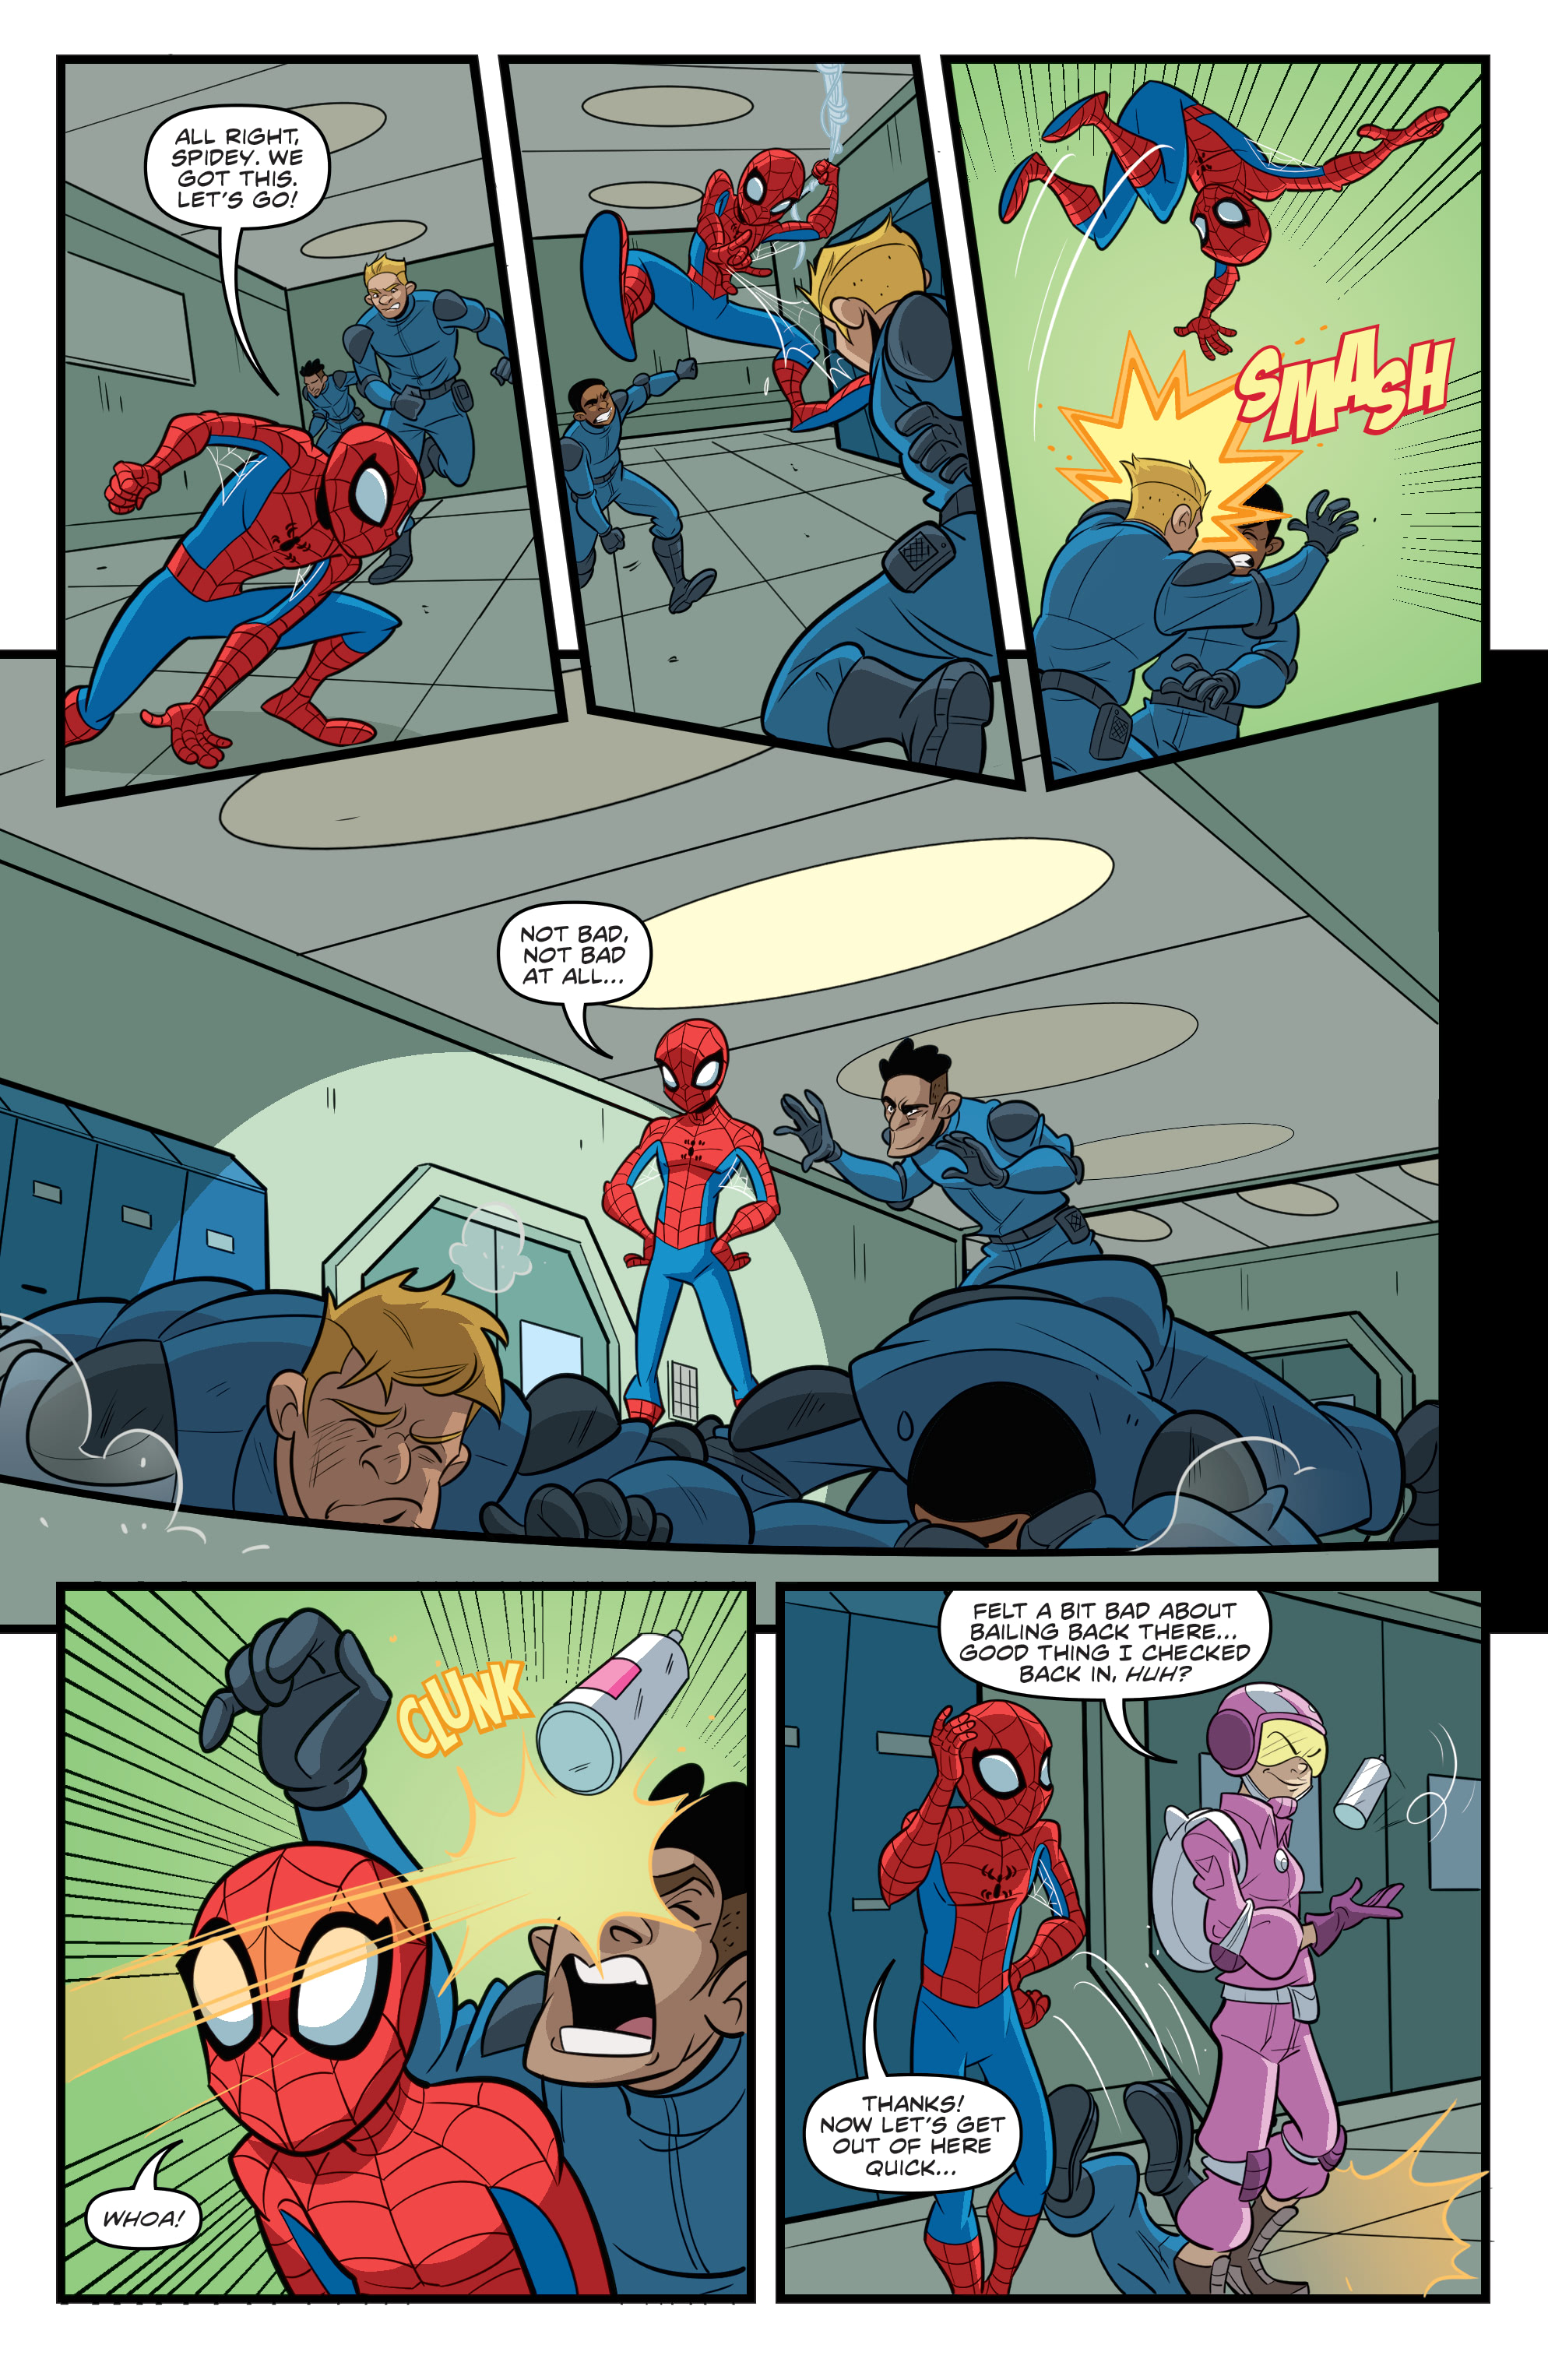 Marvel Action SpiderMan (2021) Chapter 4 Page 2